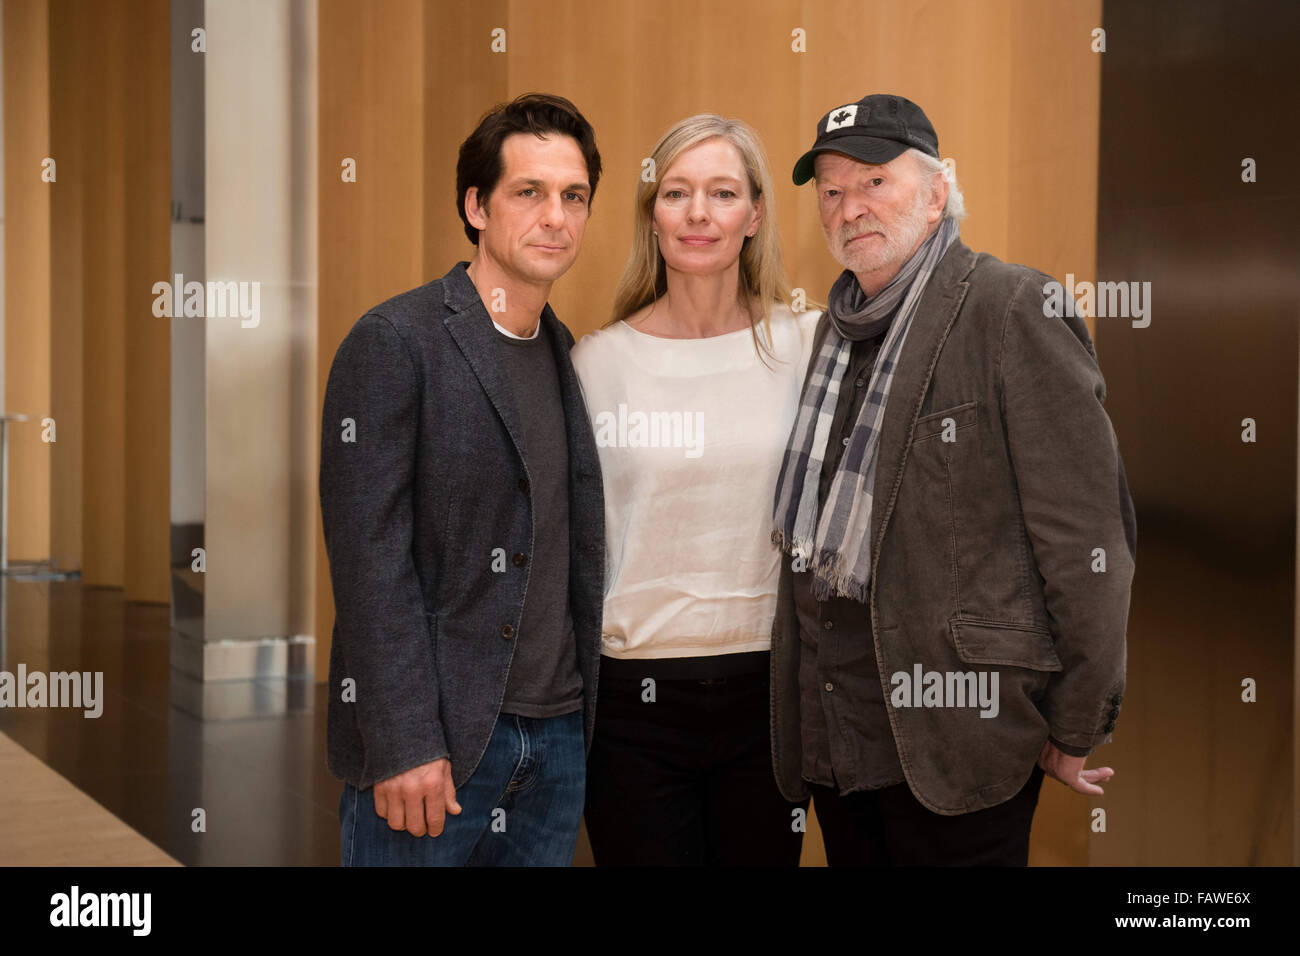 Actors Robert Seeliger (l-r), Katja Weitzenboeck and Michael Gwisdek posing for a photograp after a screening of the TV film Unser Traum von Kanada (lit. Our Dream of Canada) at the Canadian embassy in Berlin, Germany, 5 Janaury 2016. PHOTO: GREGOR FISCHER/DPA Stock Photo